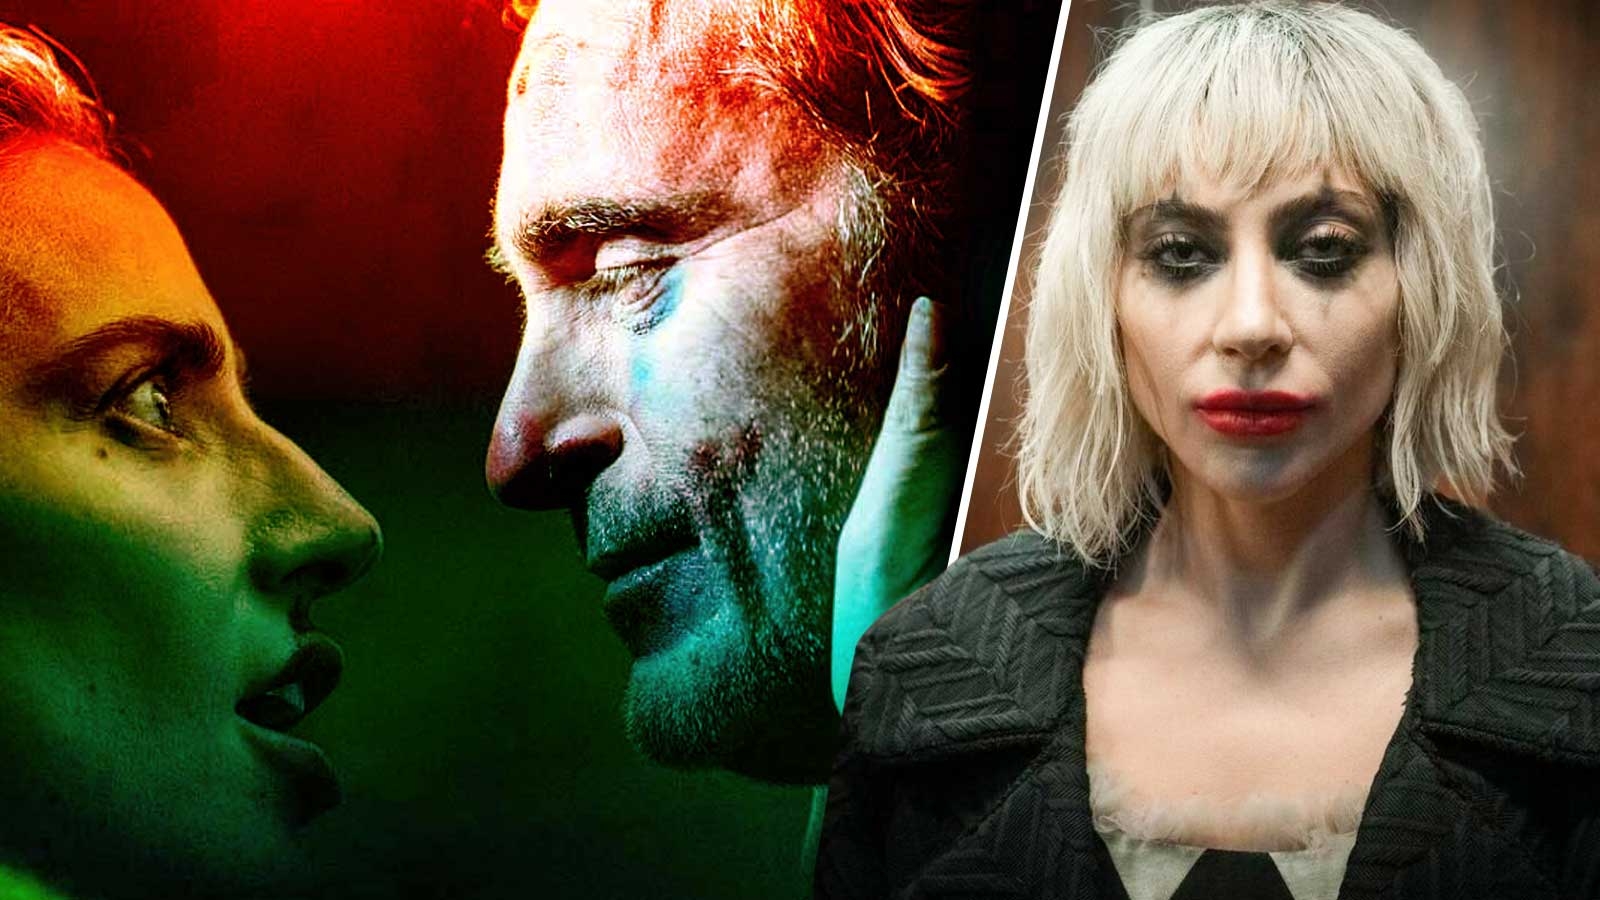 “She’s going to blow your mind”: Lady Gaga Could Be On Her Way to Win Her Second Oscar For ‘Joker: Folie à Deux’, Casting Director’s Comments Reveal